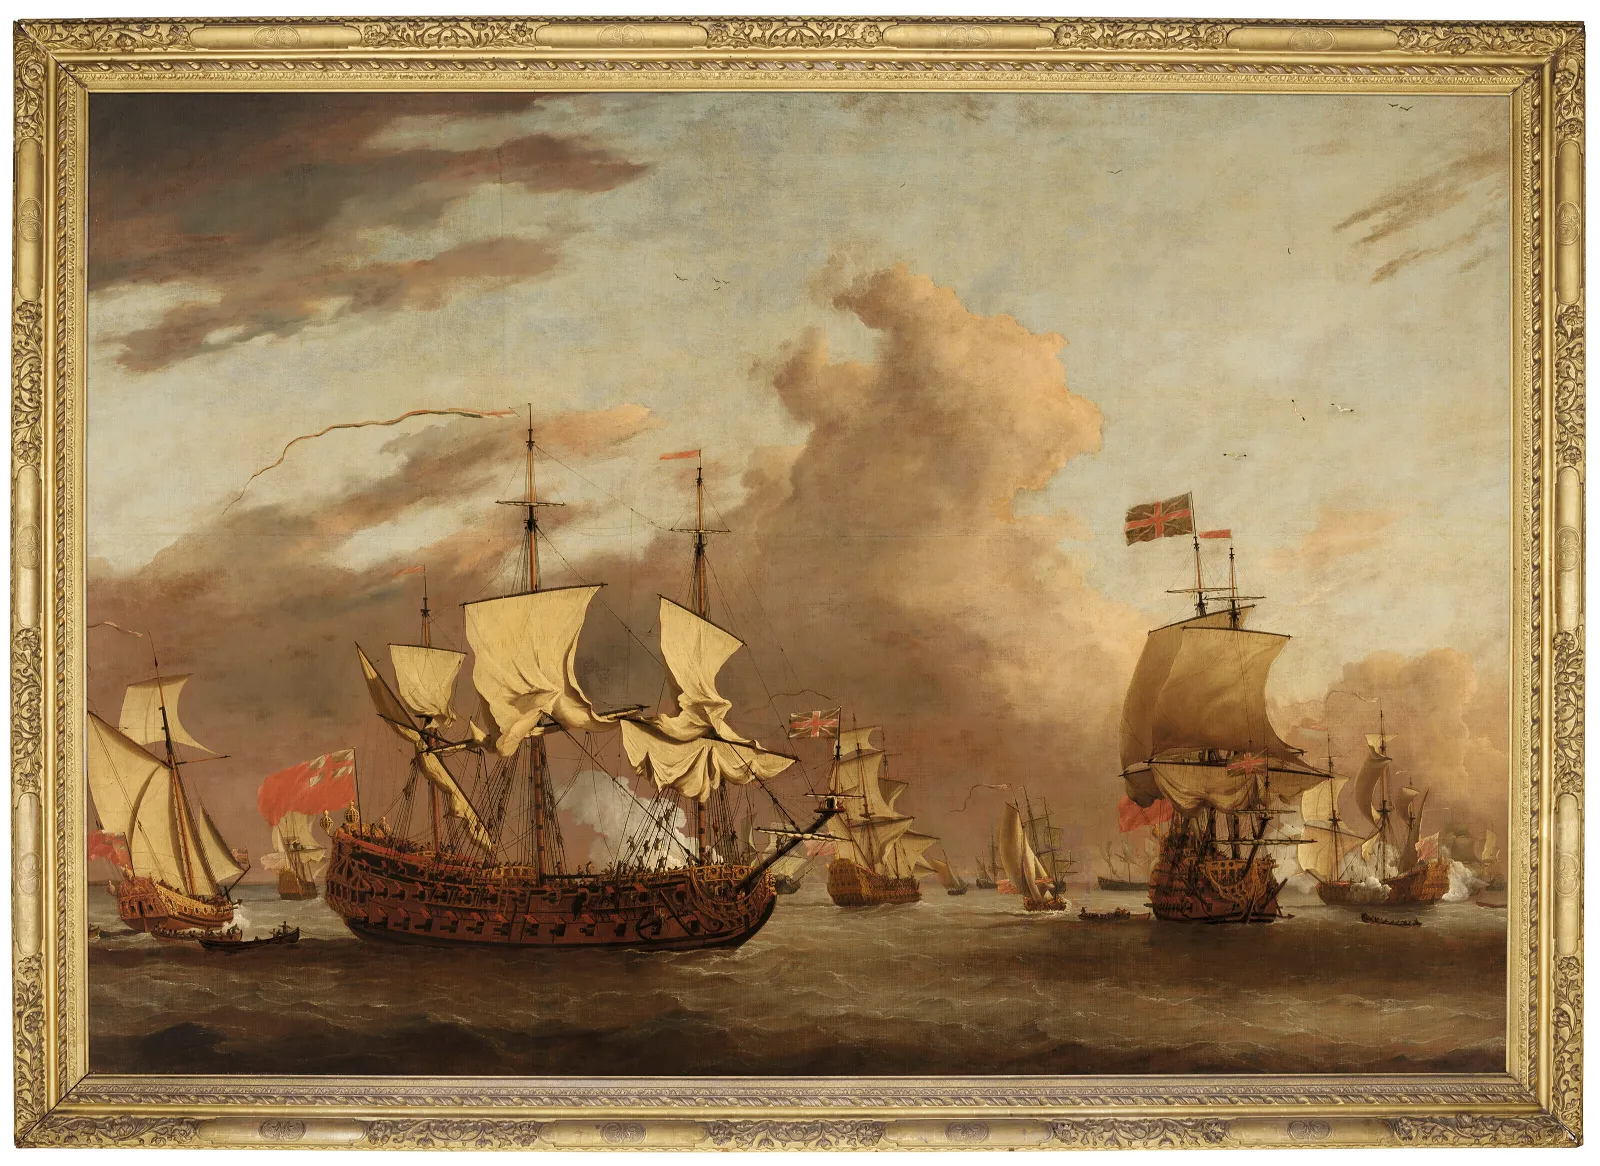 WILLEM VAN DE VELDE THE YOUNGER (LEIDEN 1633-1707 WESTMINSTER) AND STUDIO An English Two-Decker at Sea